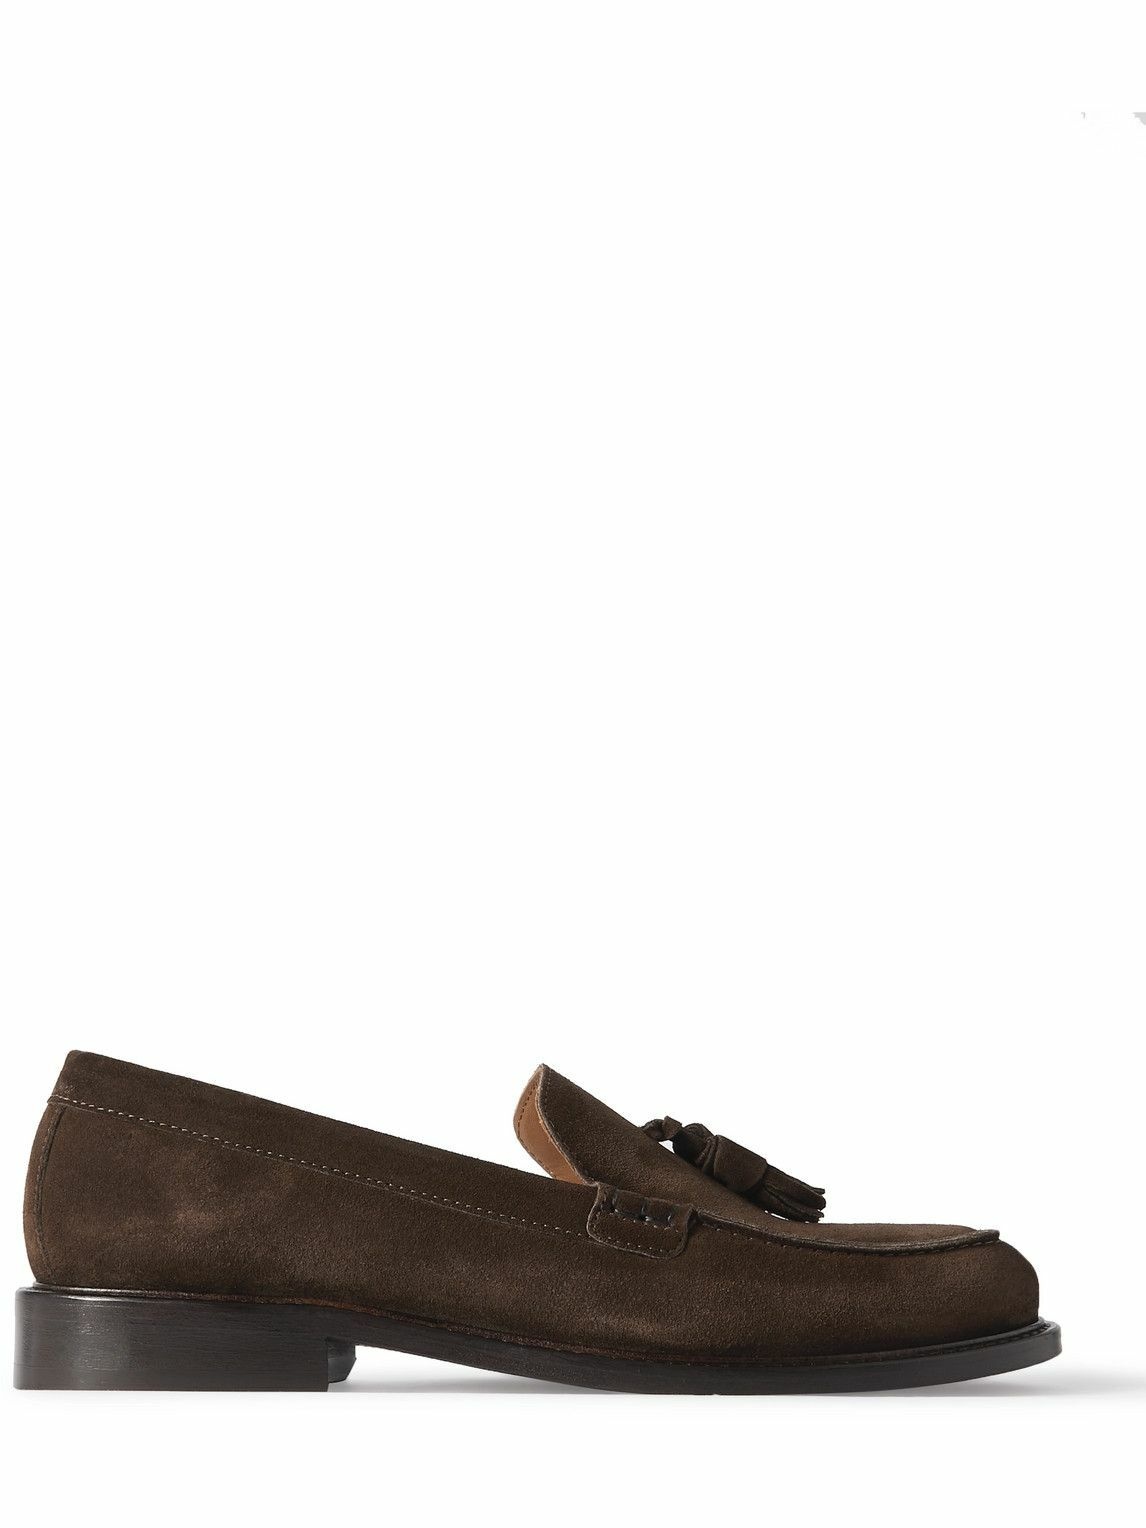 Photo: Mr P. - Scott Suede Penny Loafers - Brown